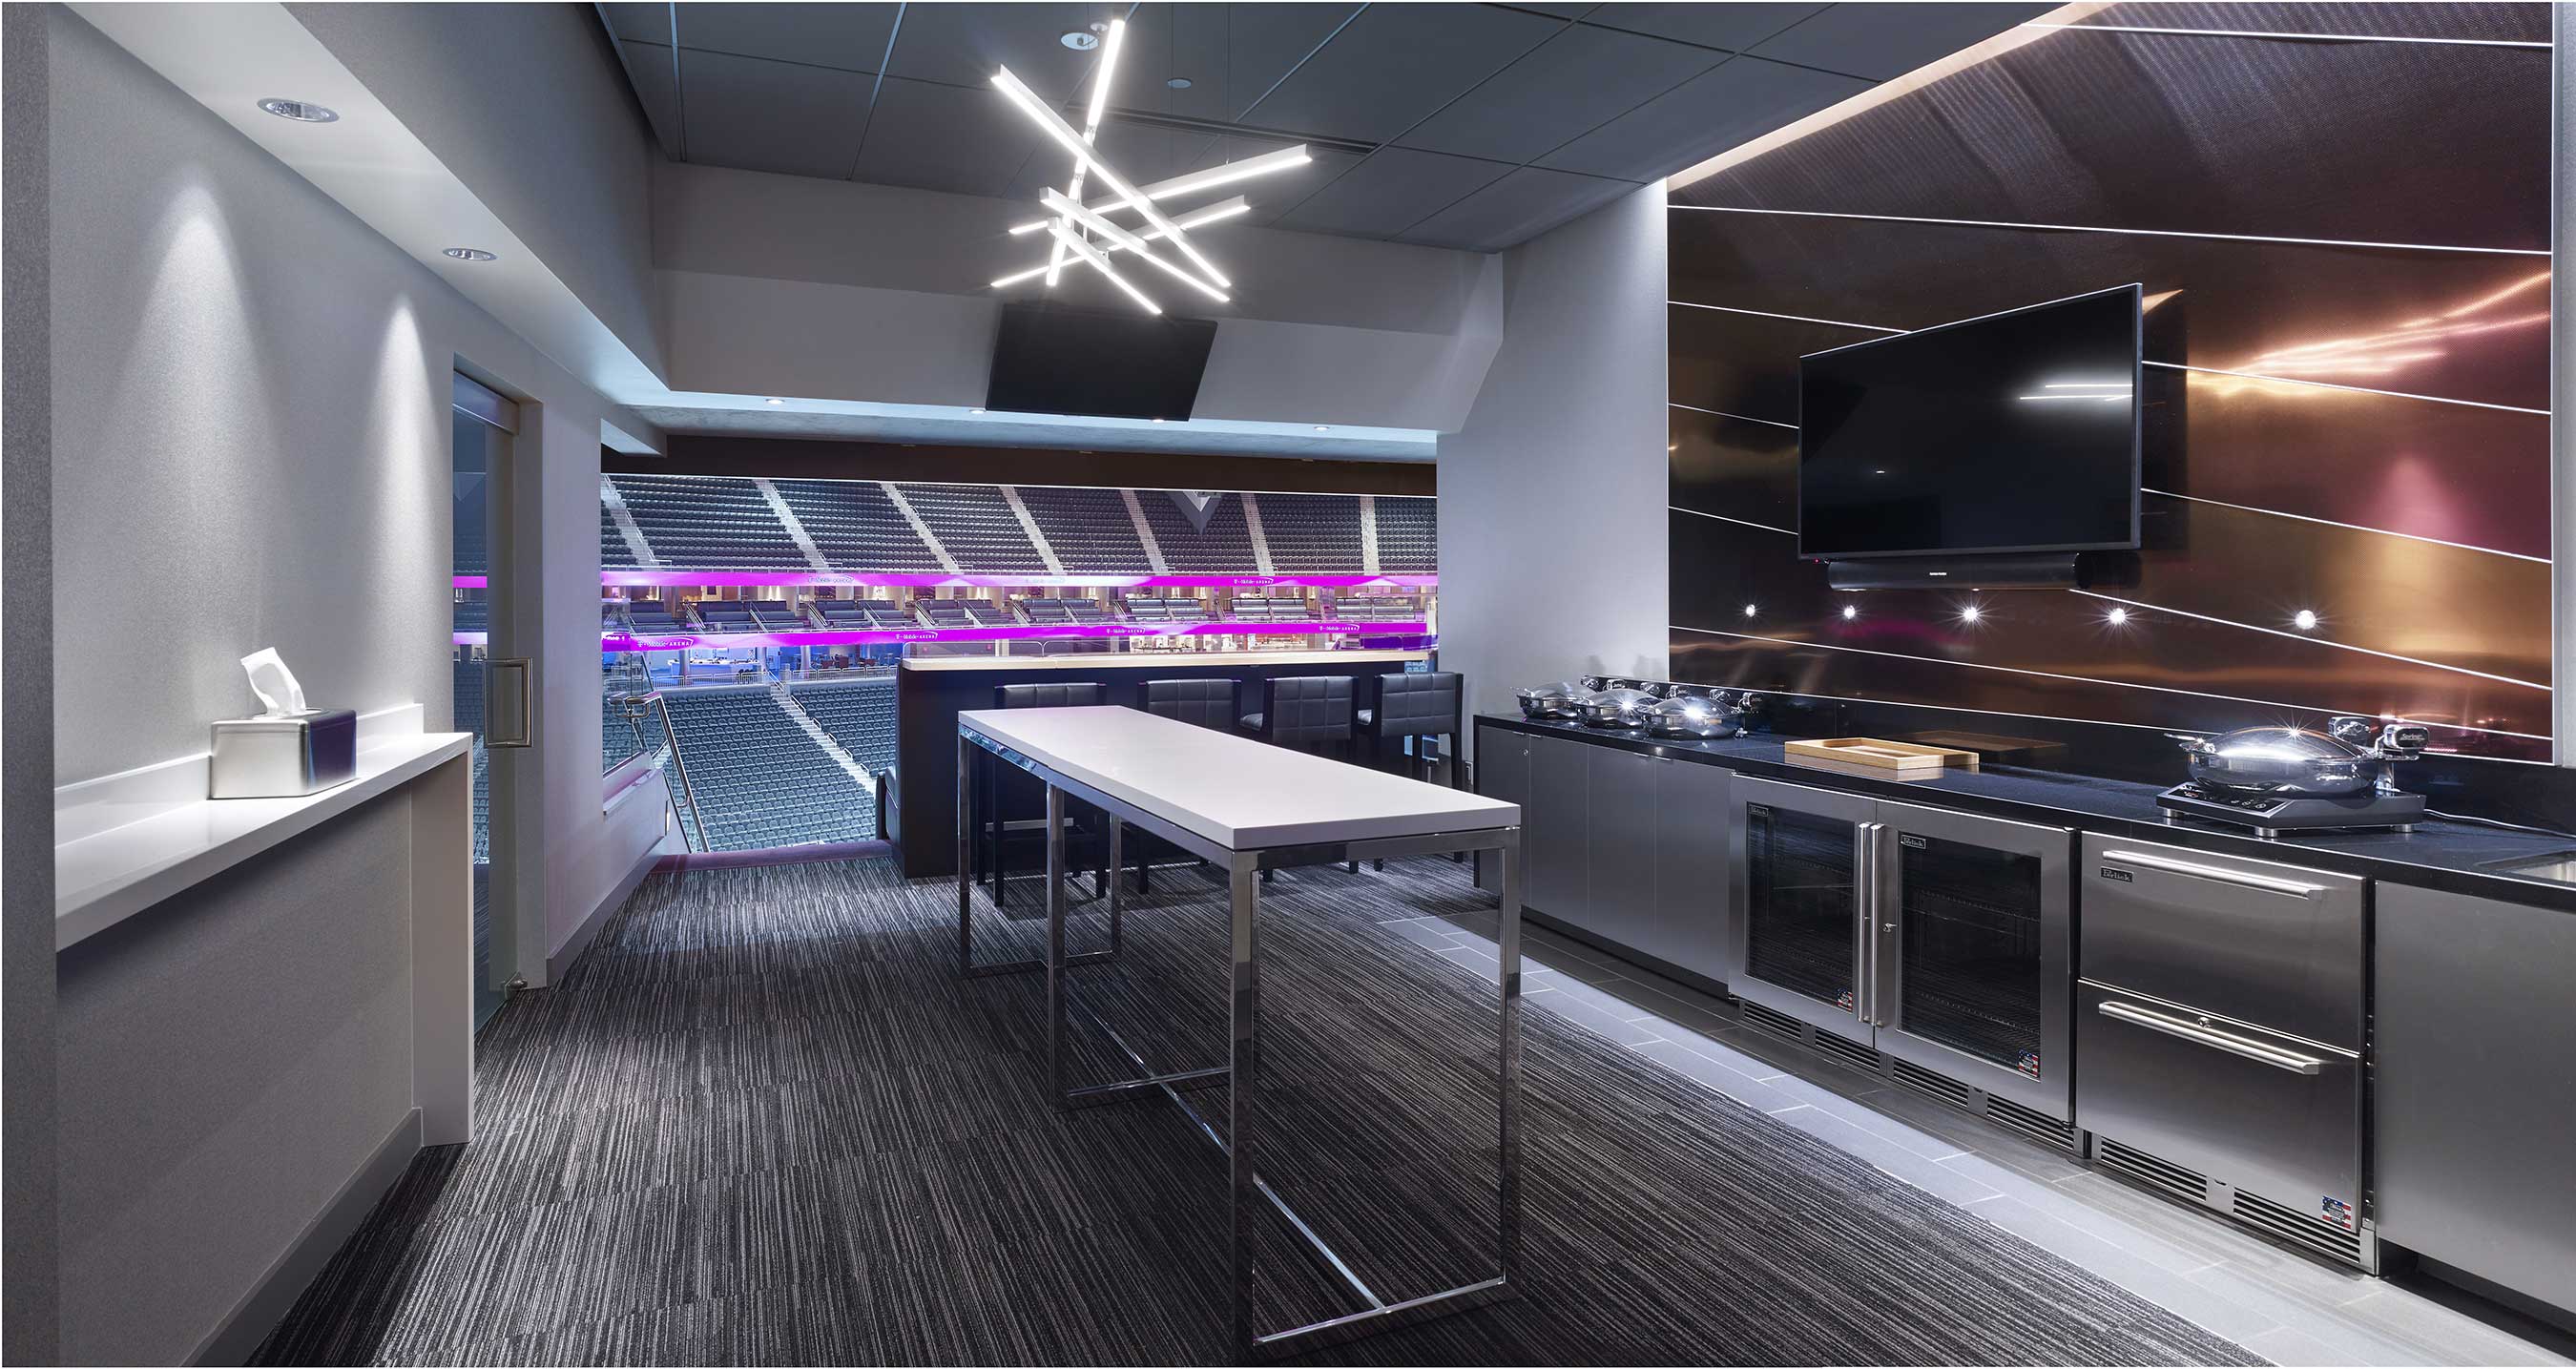 Forty-four loge boxes line the third level with seats for 16 guests, suite attendants and individual kitchenettes.